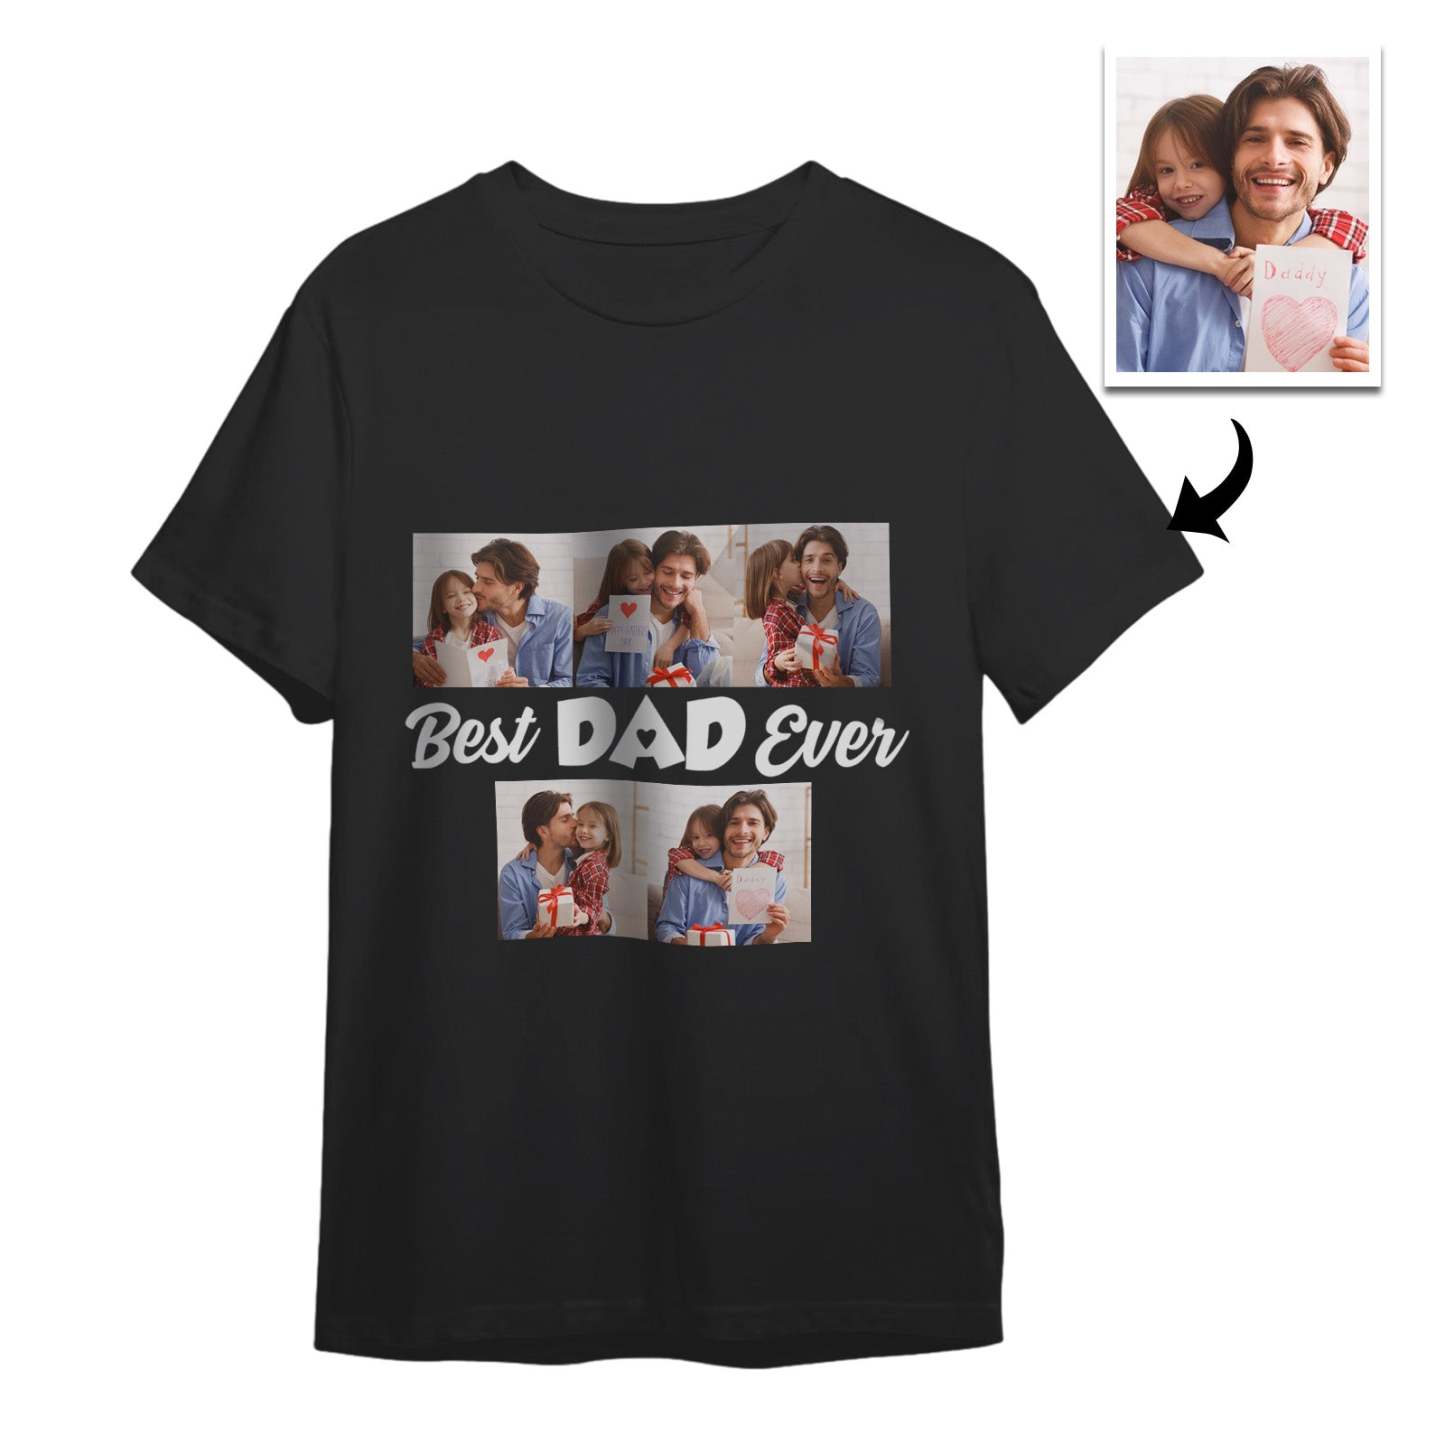 Custom 5 Photos T-Shirt With Best Dad Ever Personalized Photos T-Shirt Father's Day Gift - MyPhotoSocksAu